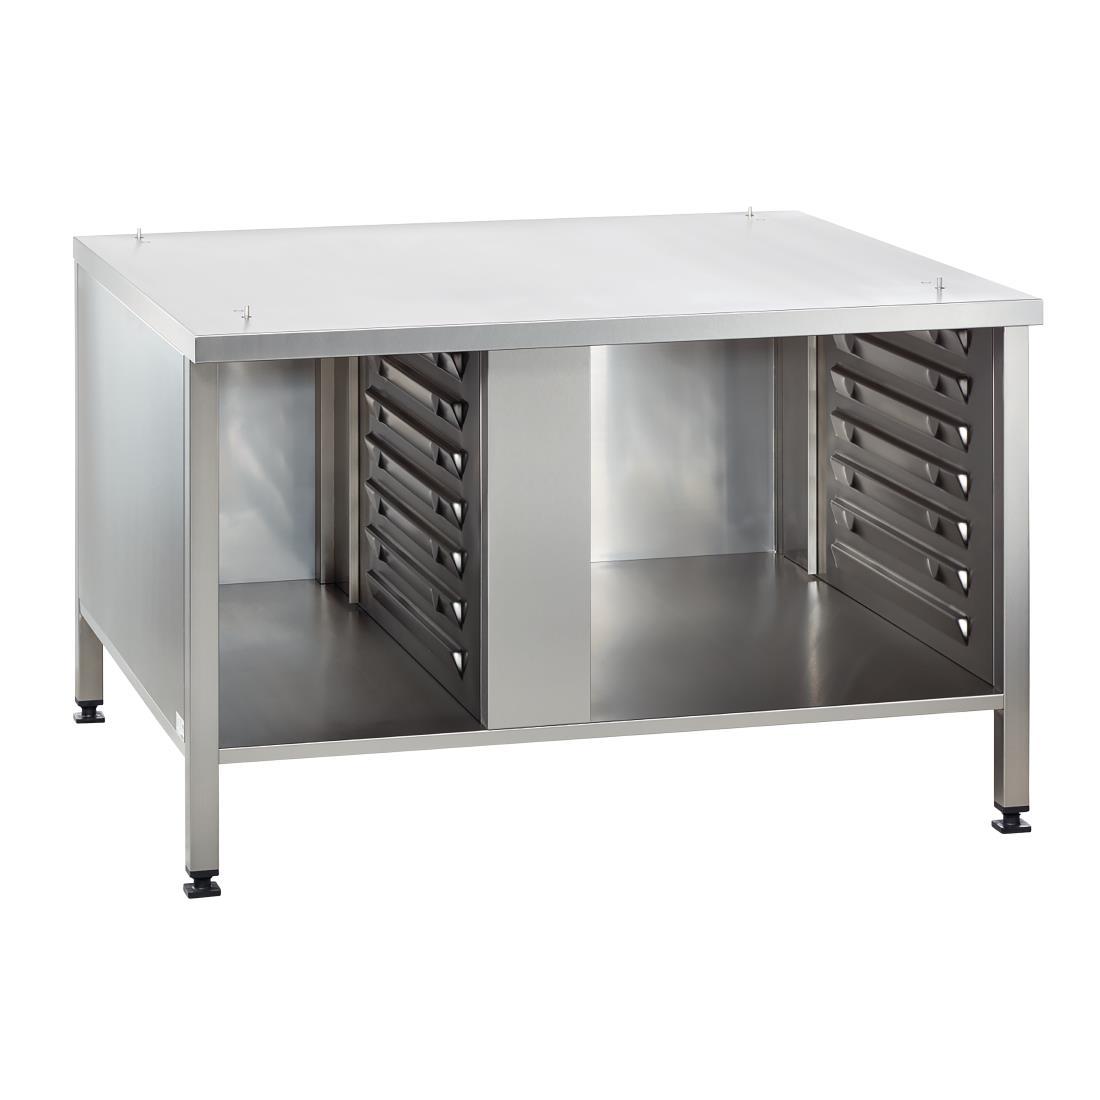 Rational Mobile Oven Stand US III for Models 62 & 102   GJ822